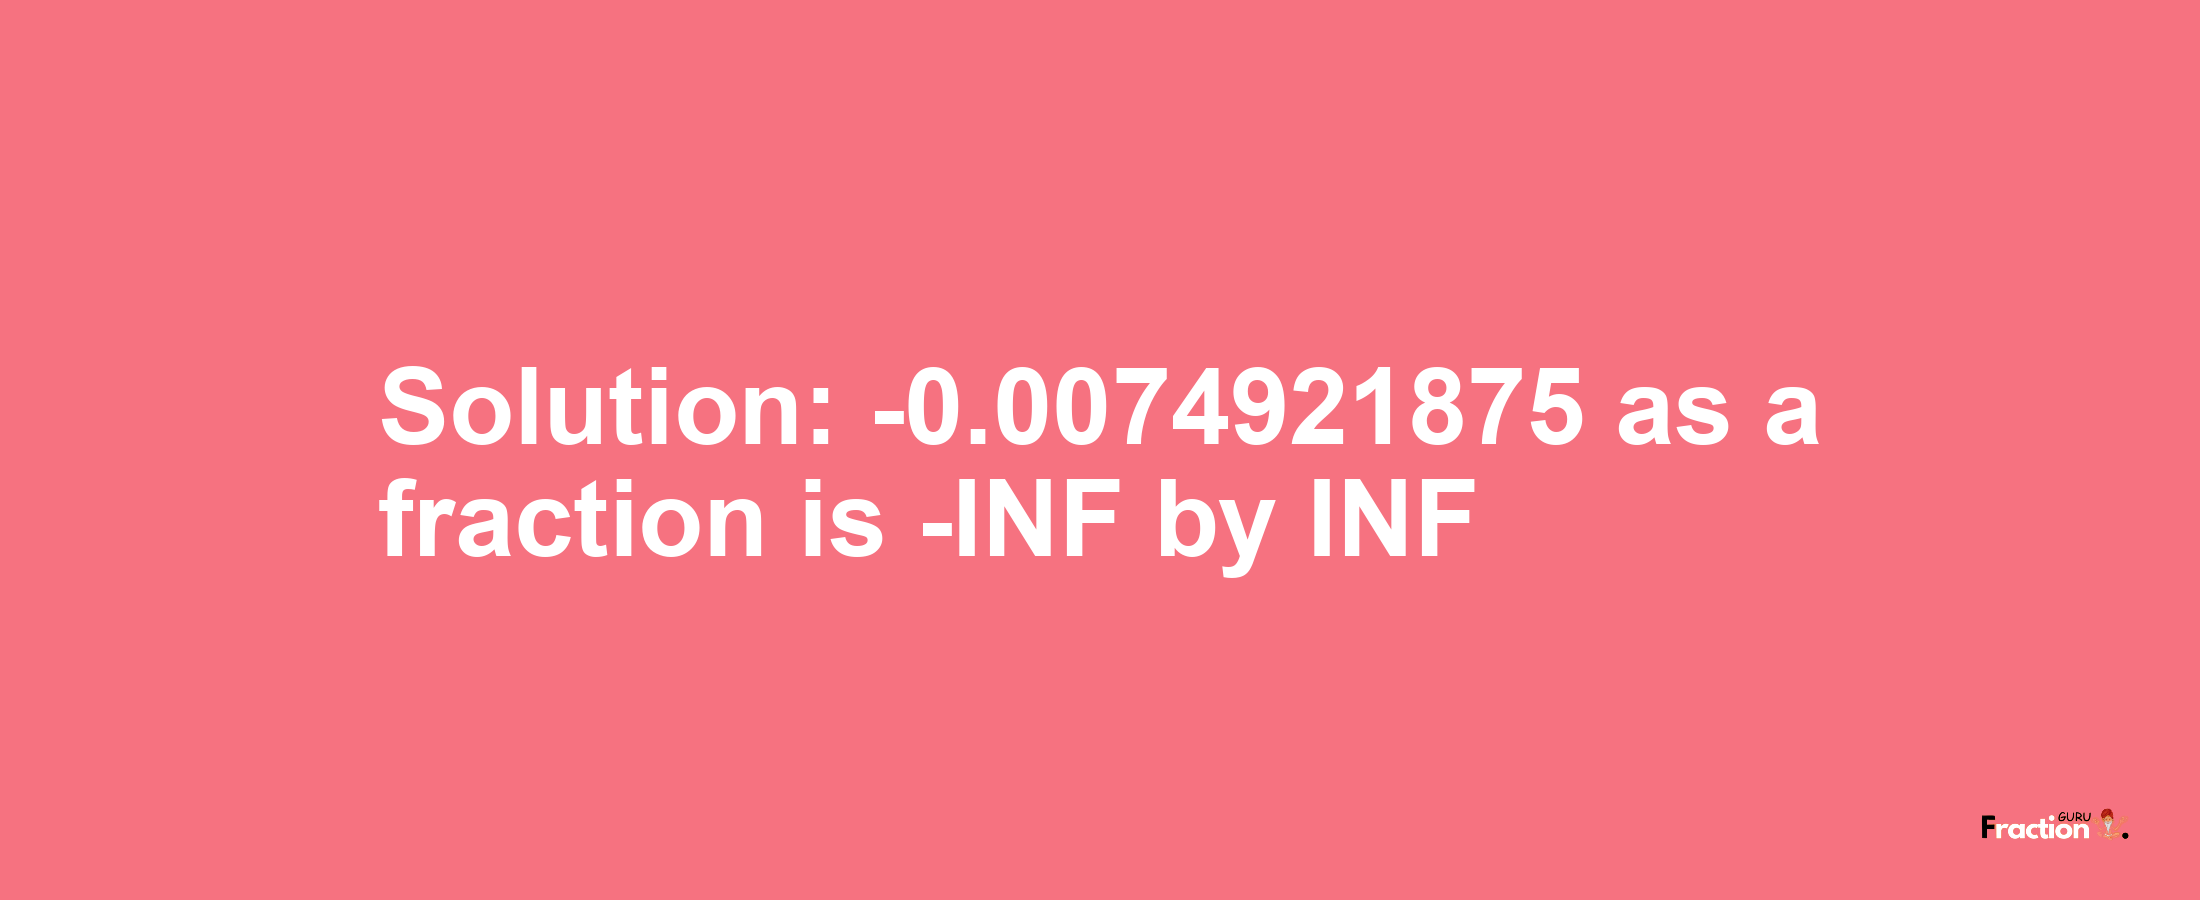 Solution:-0.0074921875 as a fraction is -INF/INF